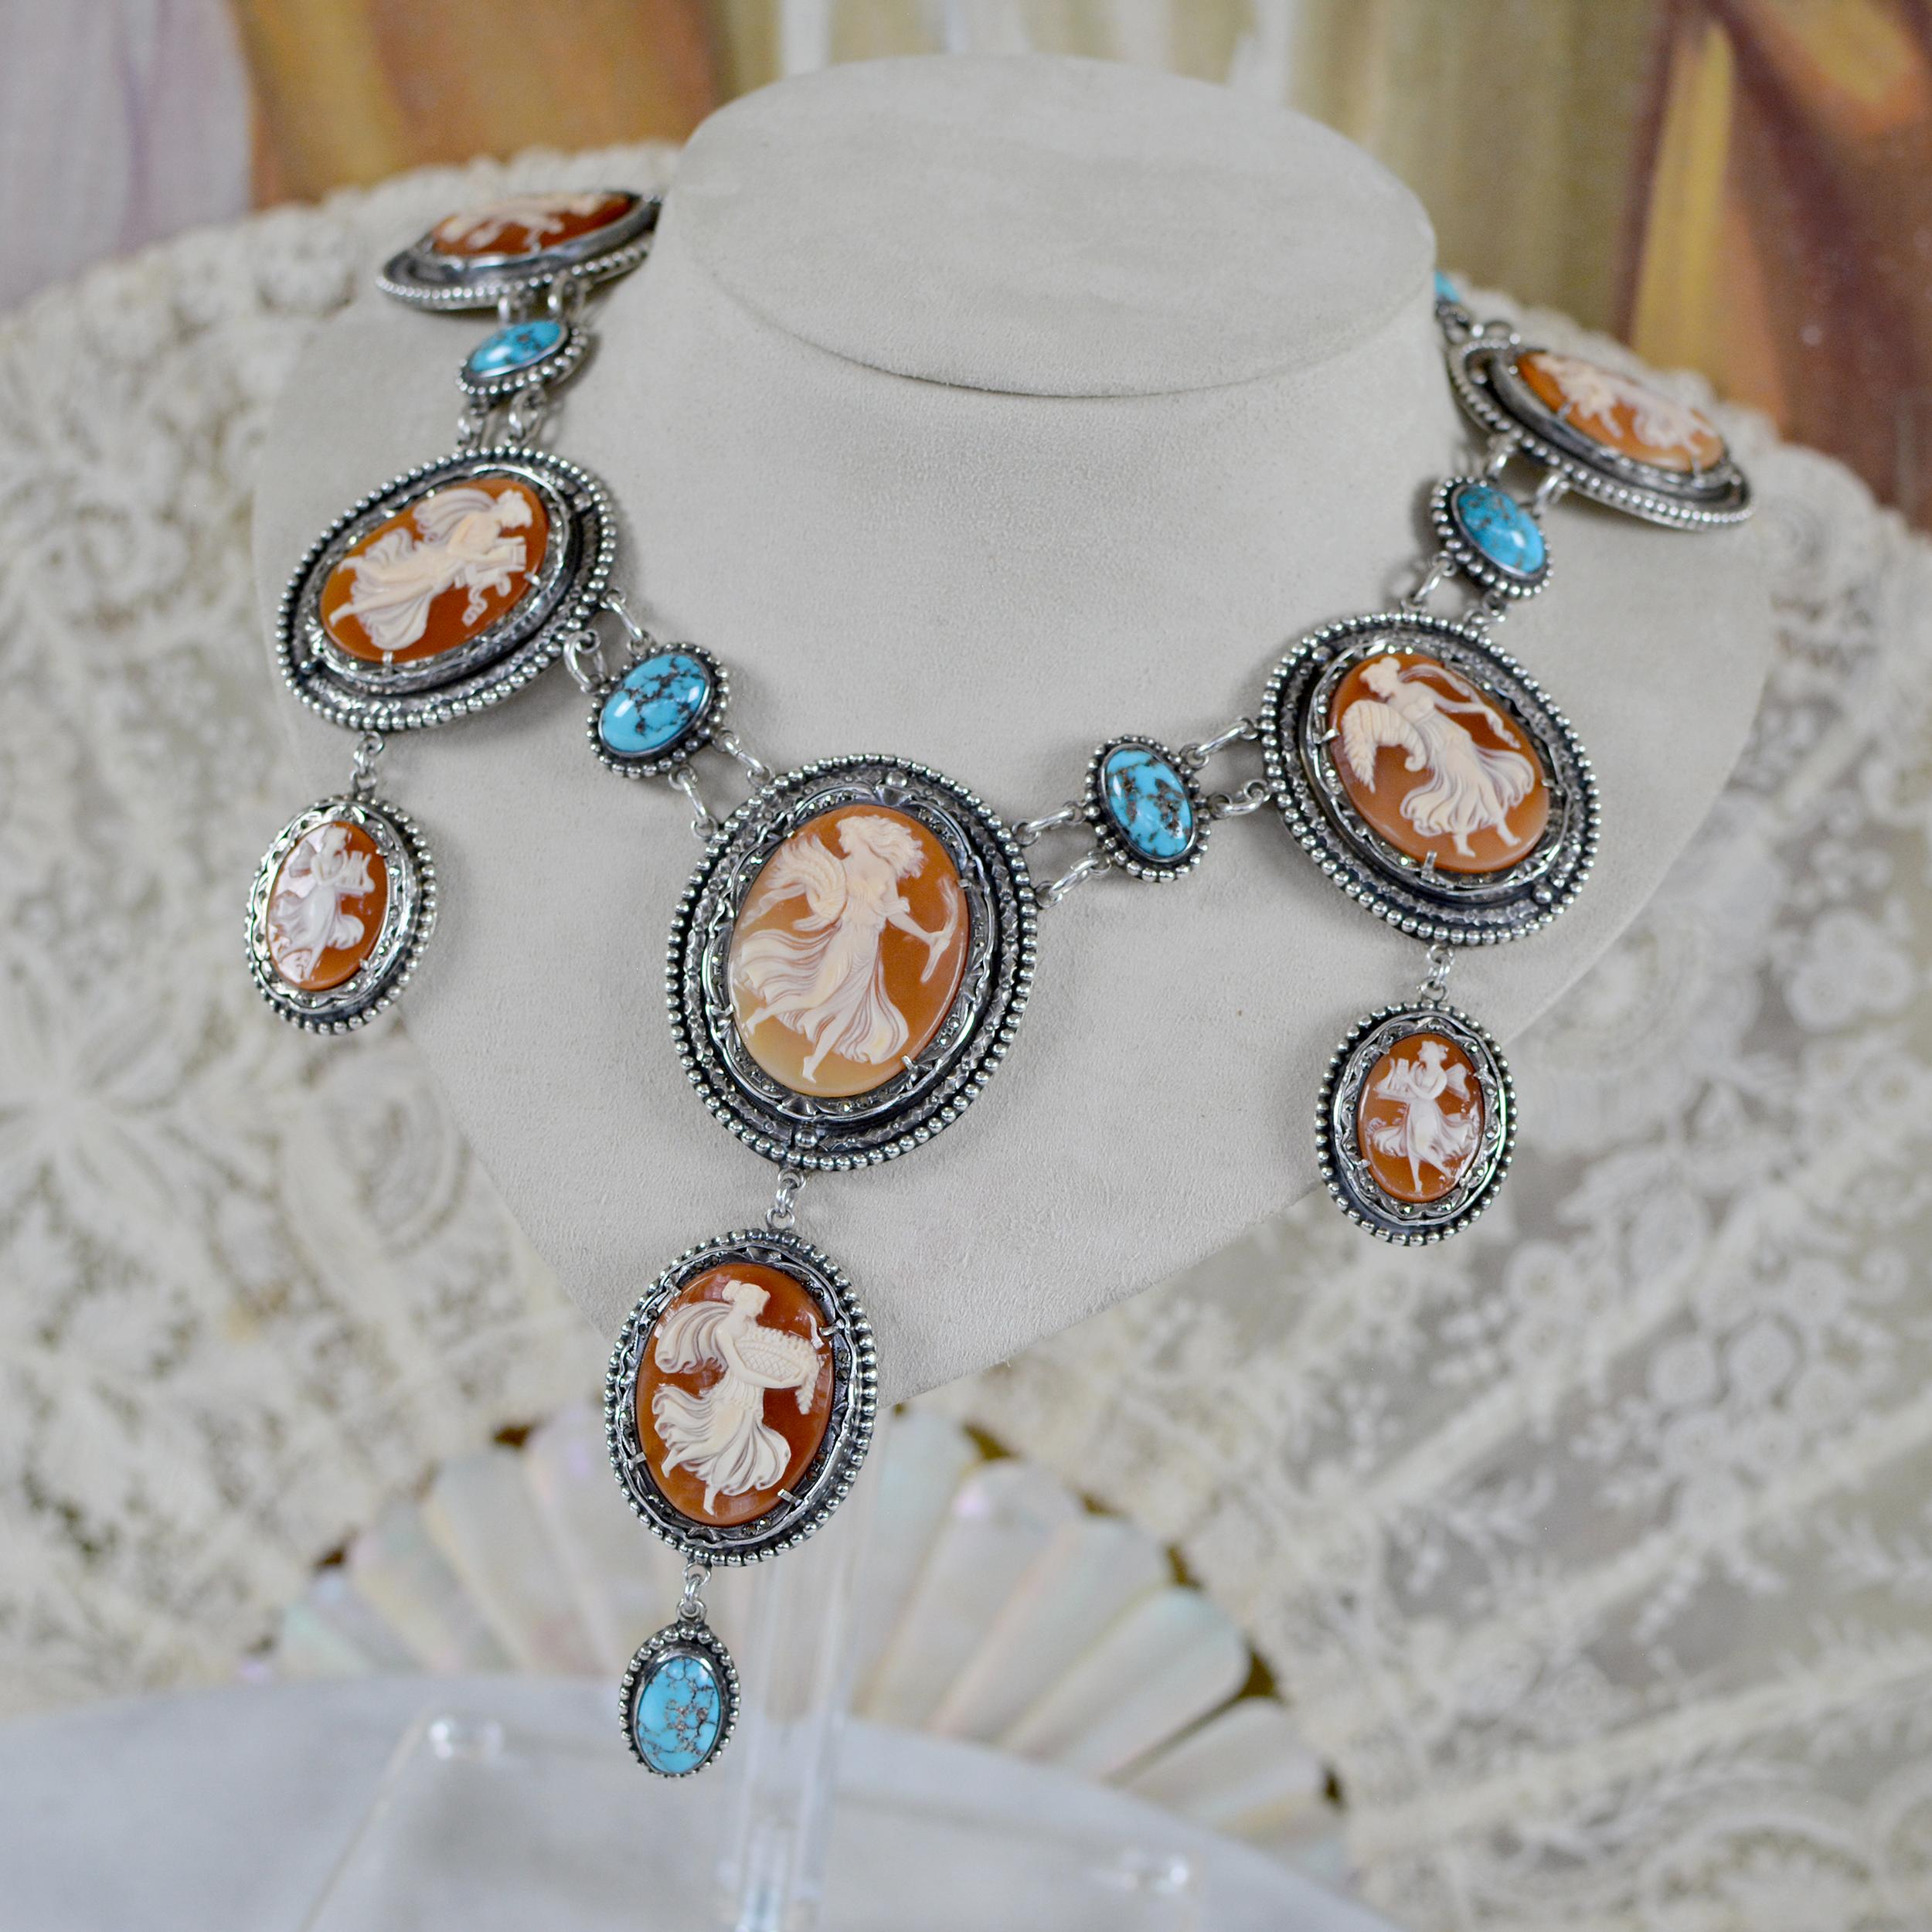 Baroque Jill Garber 19th. C. Terpsichore Cameo Suite Necklace with Persian Turquoise  For Sale